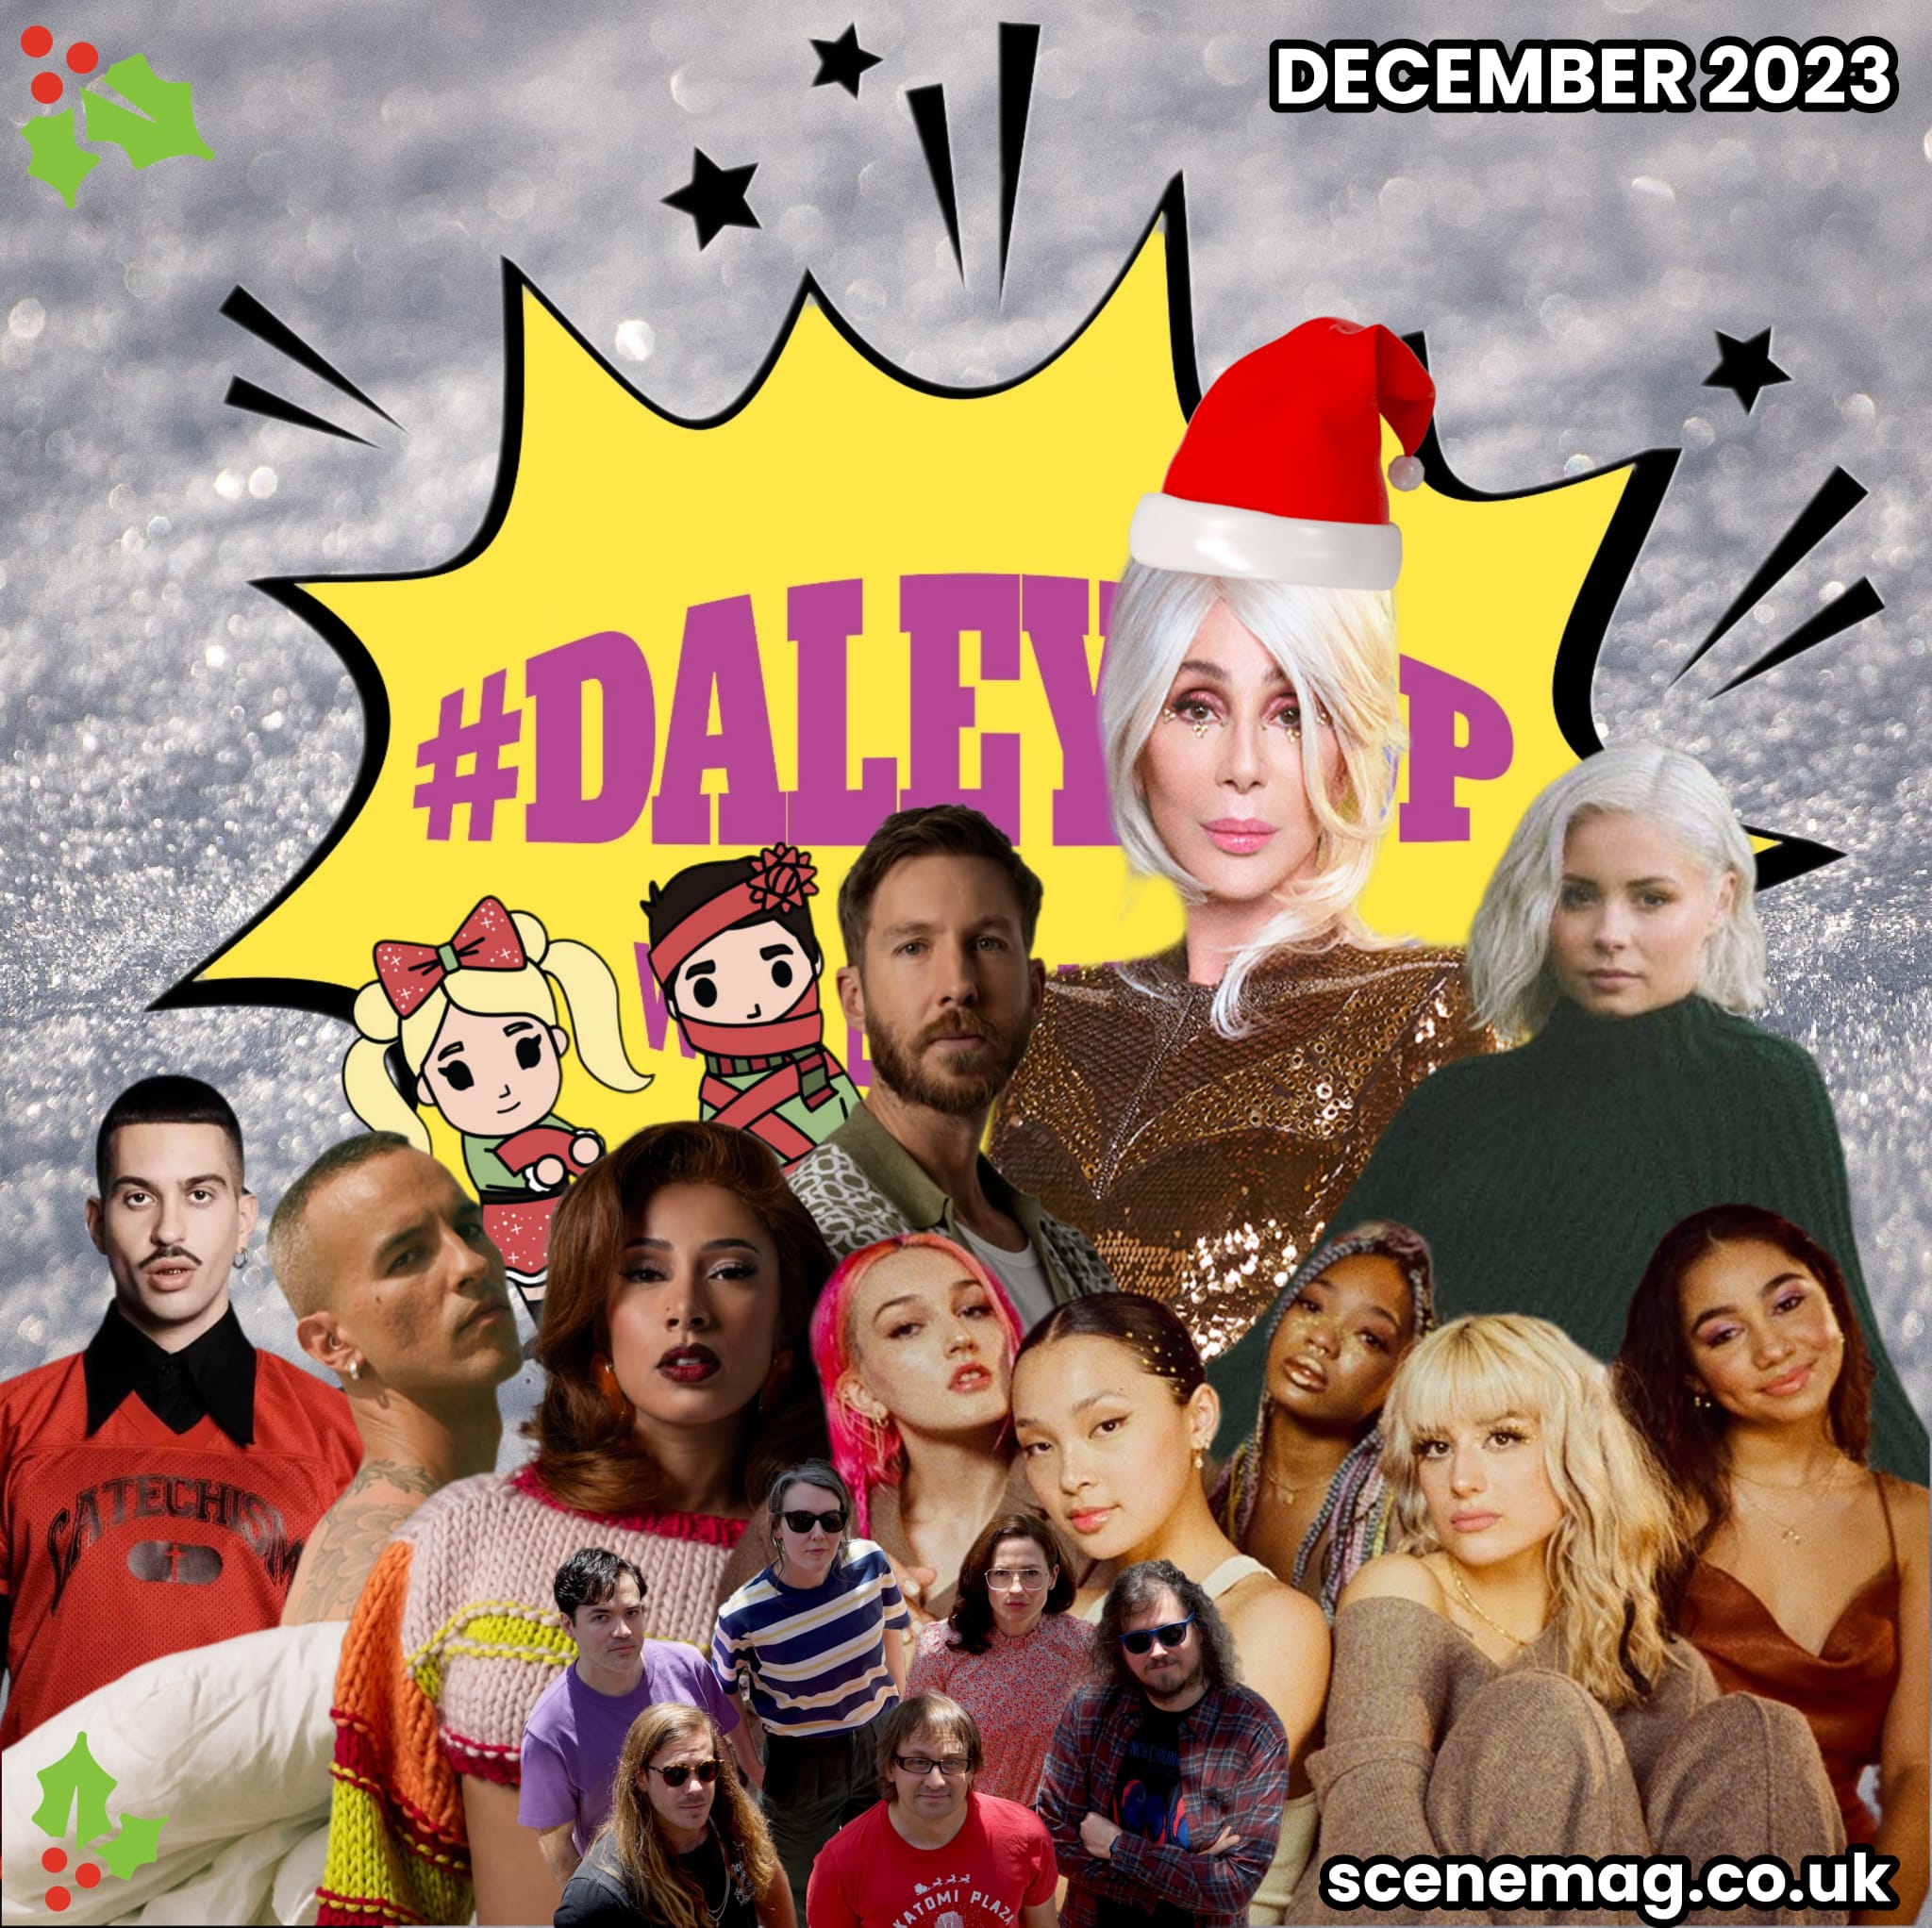 CHER WITH EVERYONE! #DaleyPop festive edition is here🎁